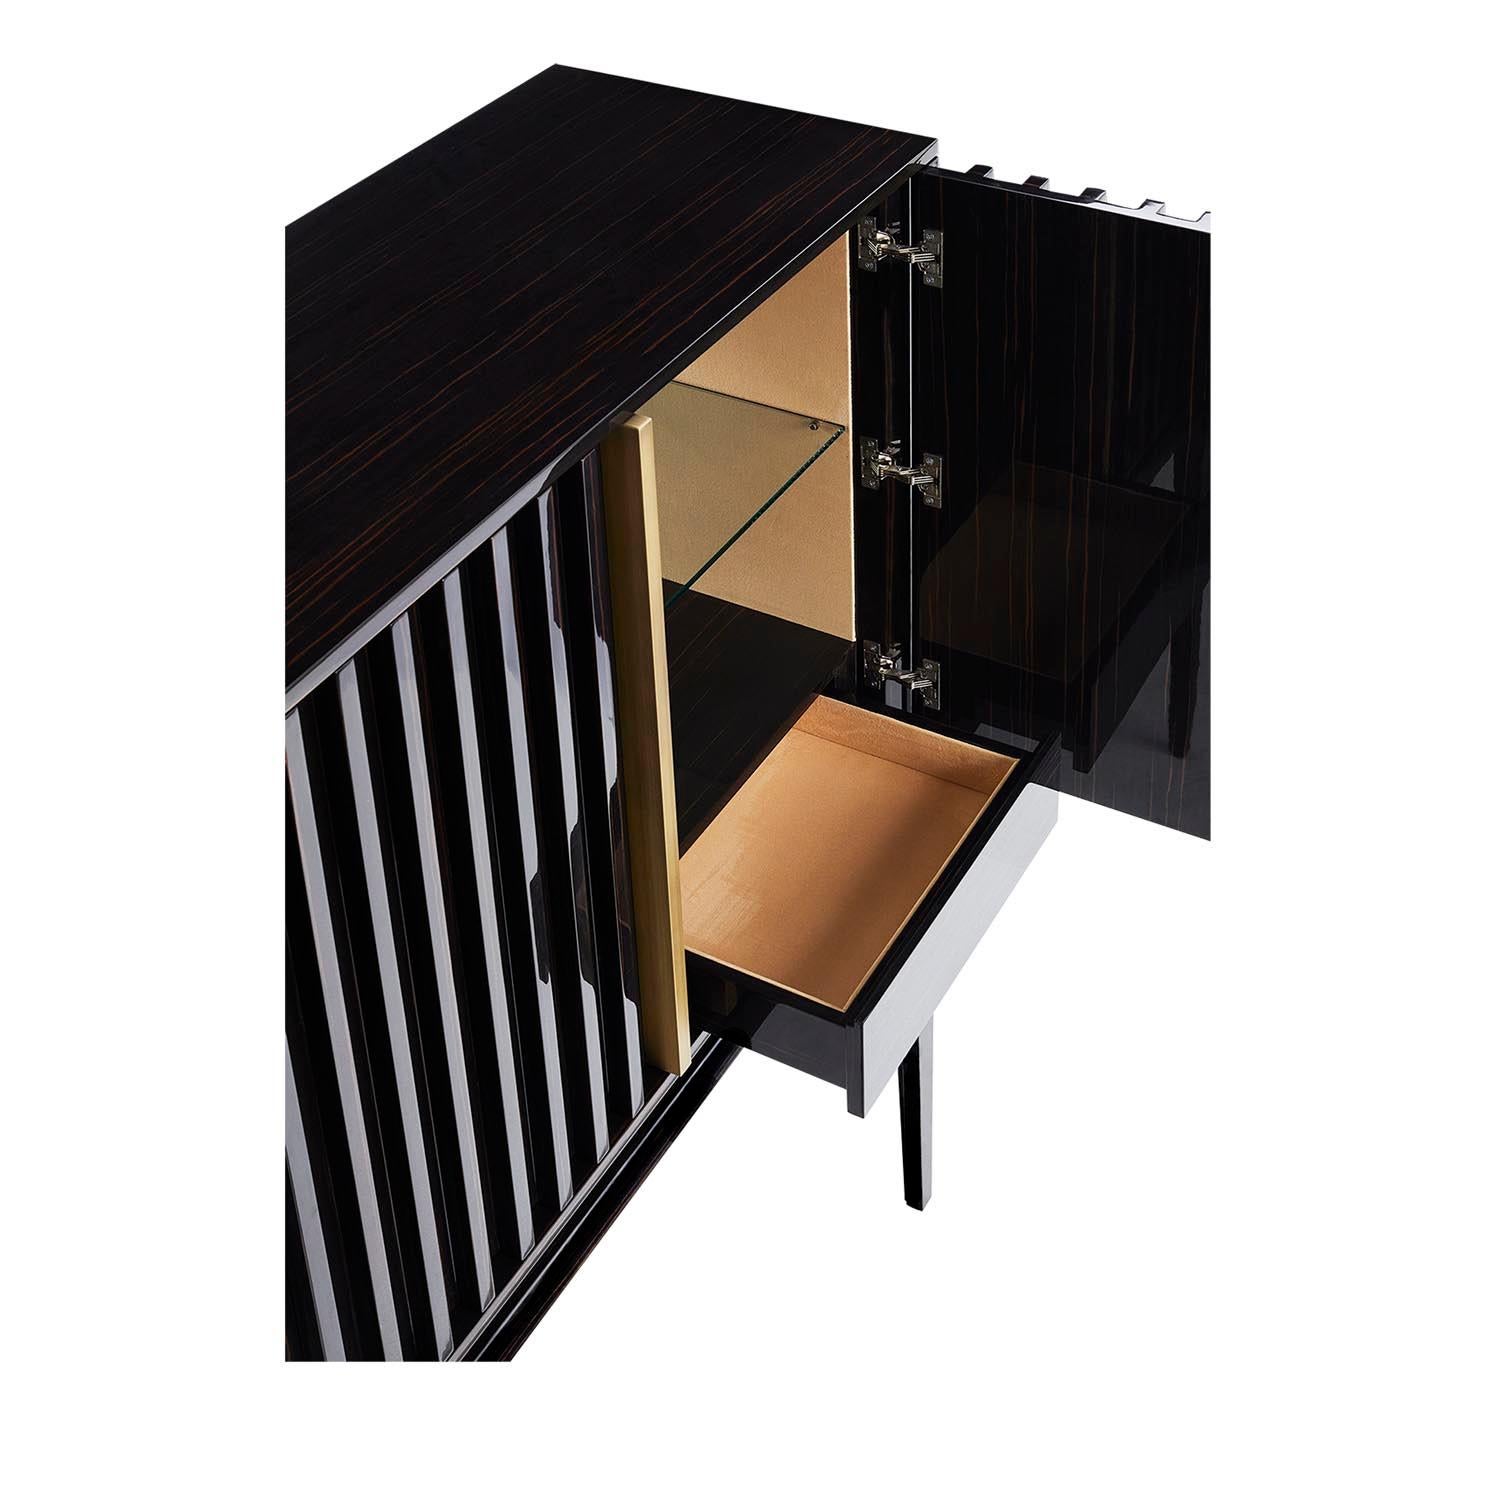 The Relevo bar cabinet is a must-have for any living room. With a modern design and incomparable quality, it will not go unnoticed in your room. The slatted structure detail and the metal handles, in brass or stainless steel, gives it a strong